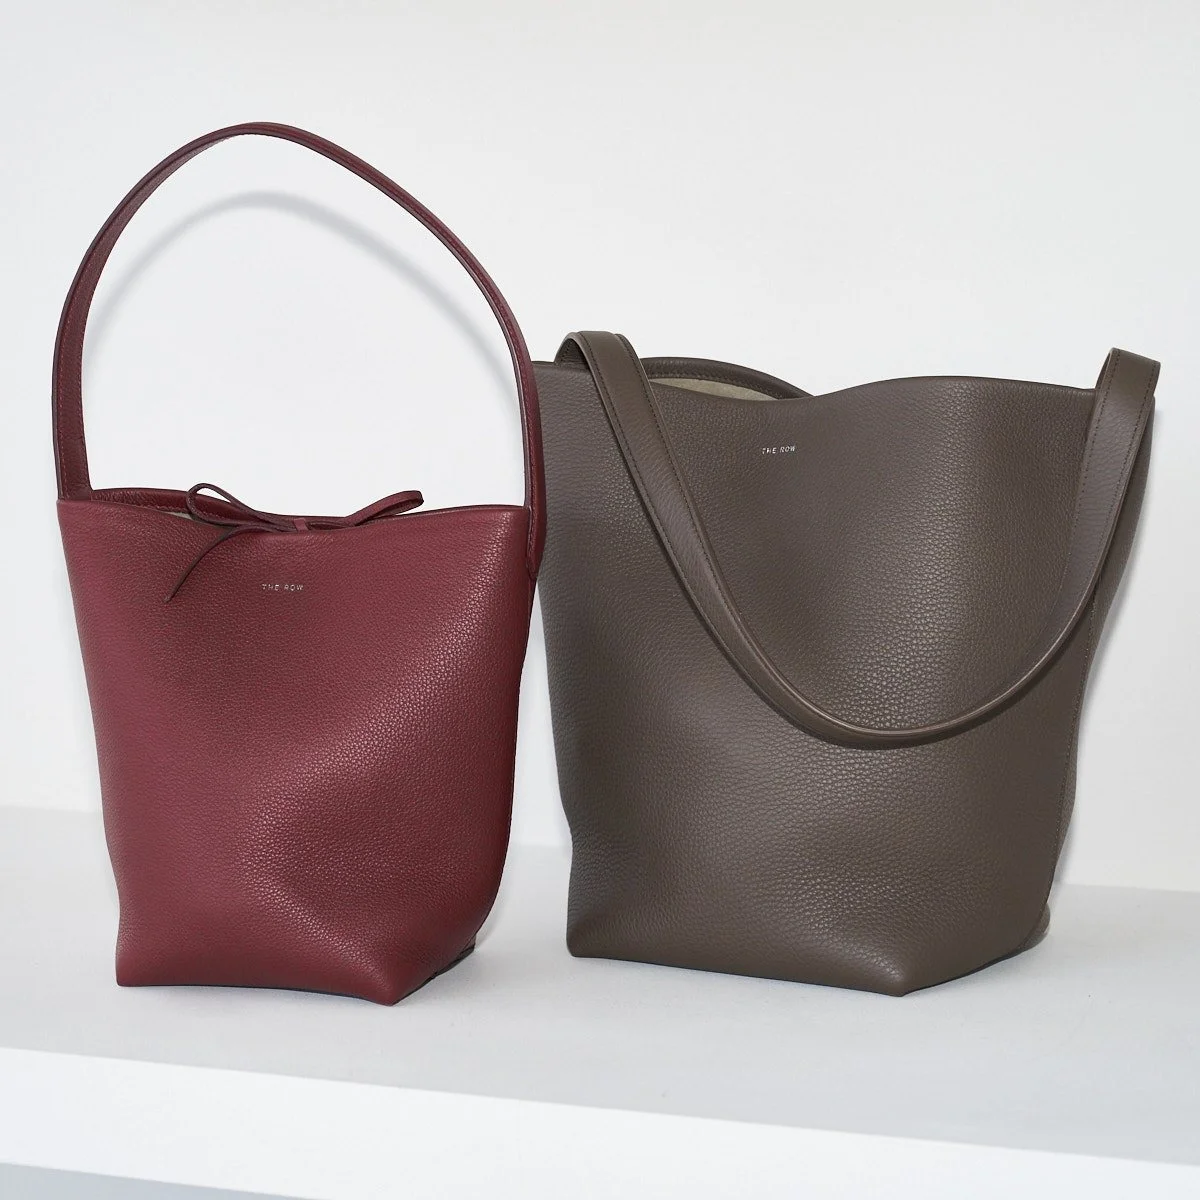 THE ROW（ザ・ロウ）「SMALL N/S PARK TOTE」バッグ、「MEDIUM N/S PARK TOTE」バッグ